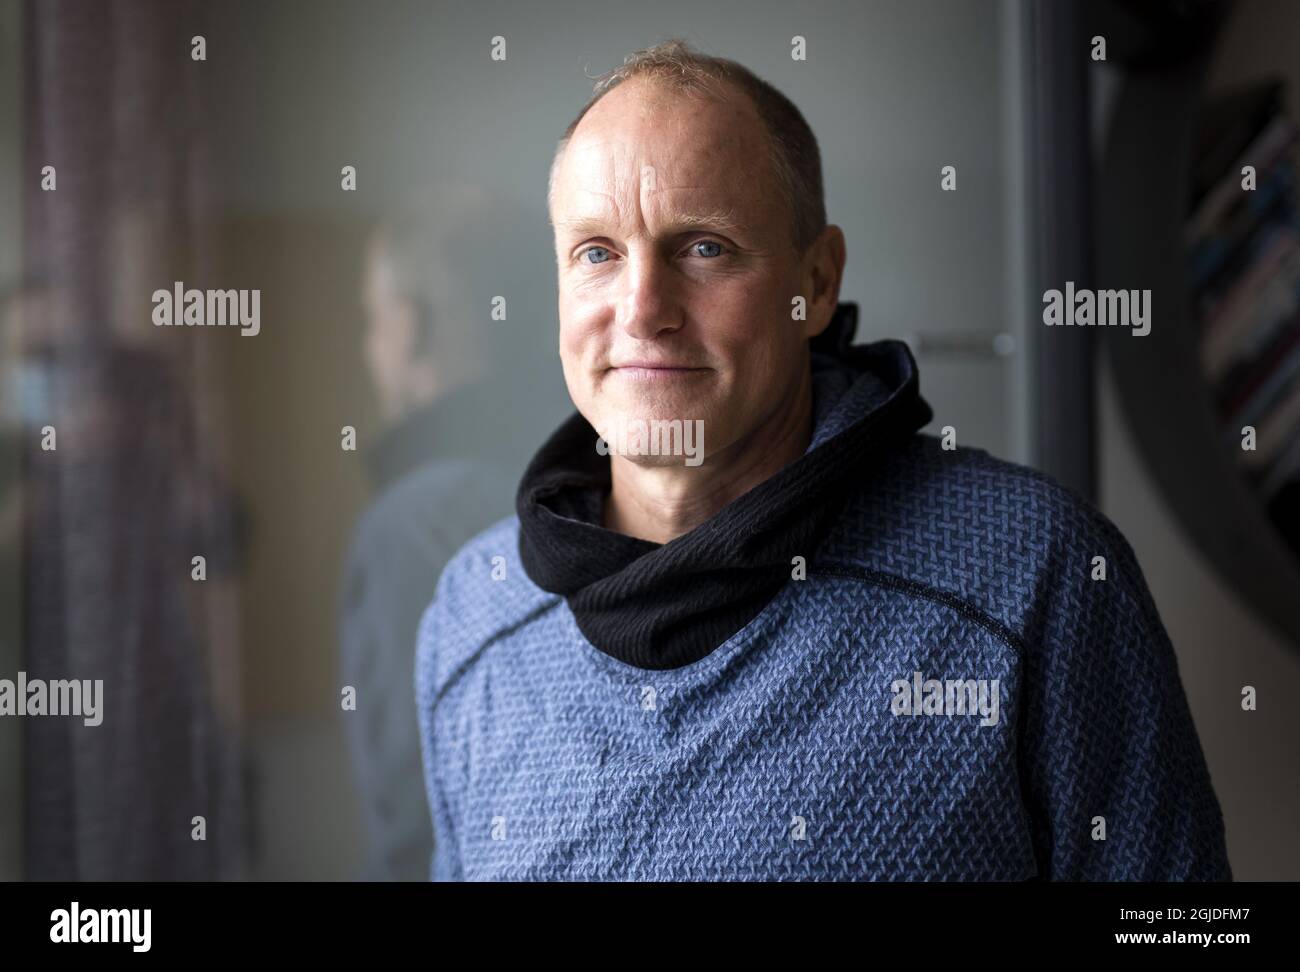 Woody Harrelson in Sweden shooting scenes for Ruben Ostlund's new film 'Triangle of Sadness' in Trollhattan, Sweden, July 03, 2020. Woody plays a severely alcoholic, Marxist naval captain. Photo: Thomas Johansson / TT / code 9200 Stock Photo